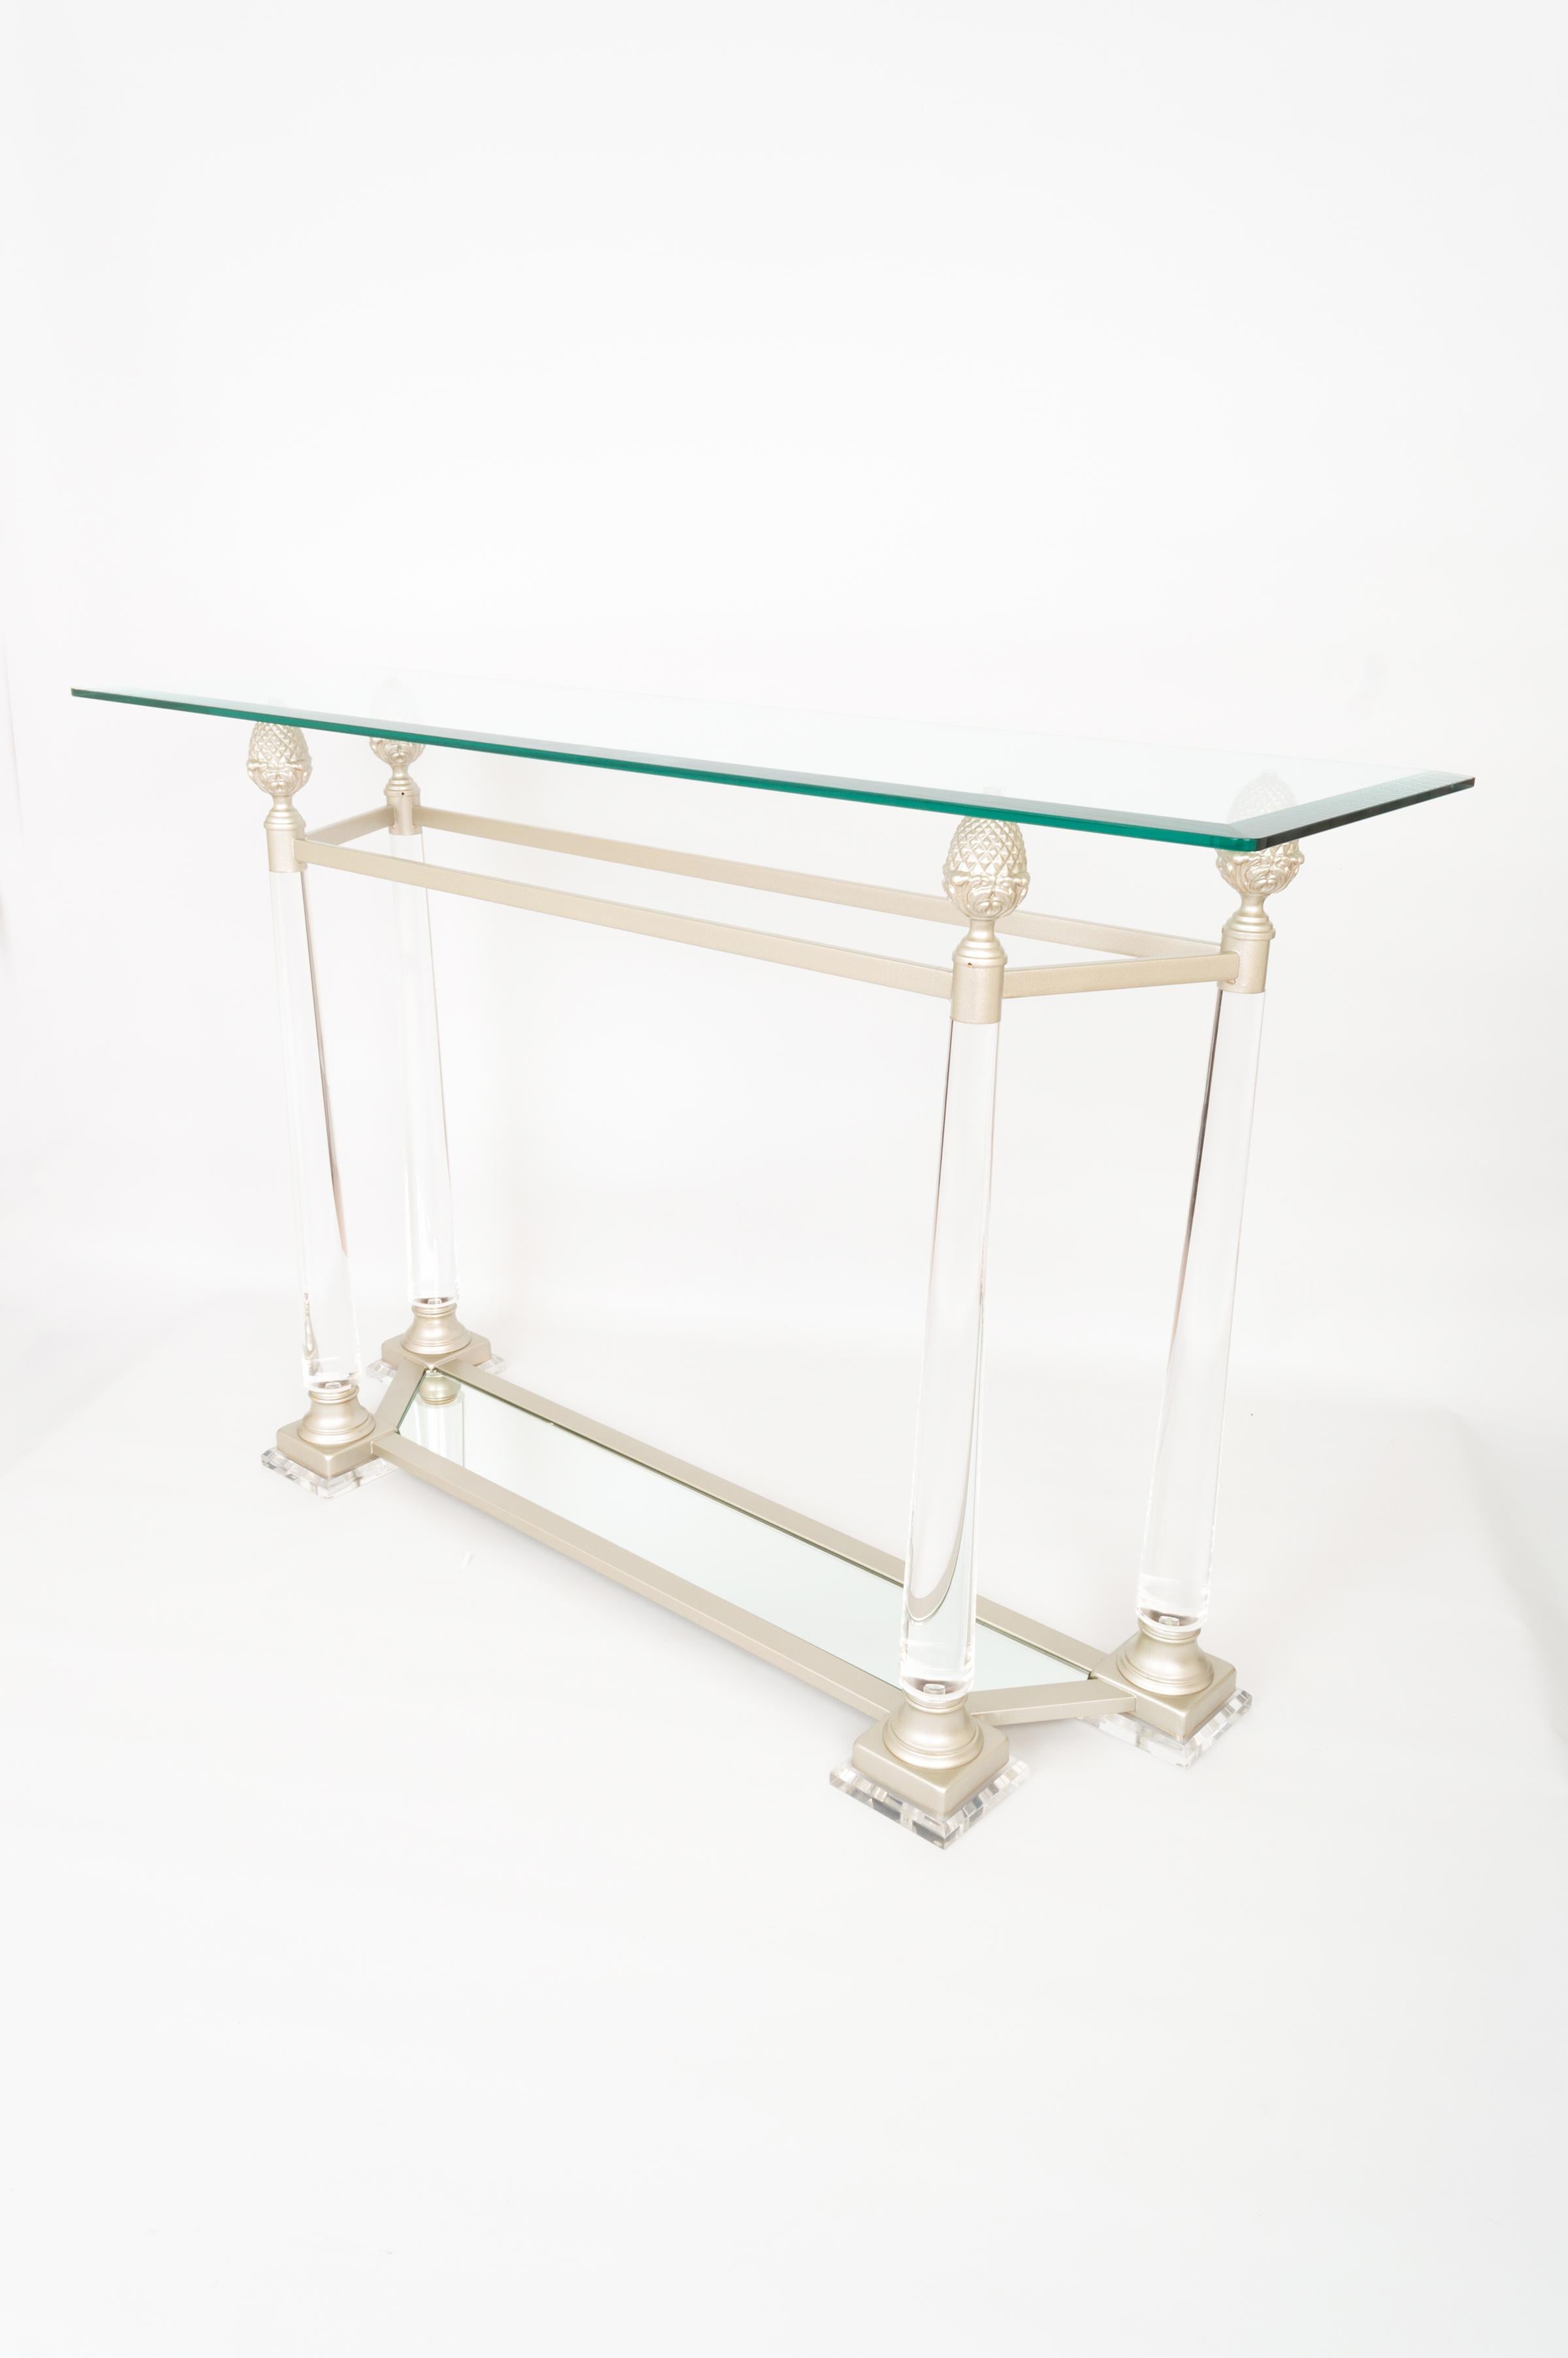 A glass and lucite console table France C.1970
Tapered lucite supports, pineapple detailing and a mirrored base.
In excellent vintage condition commensurate of age.